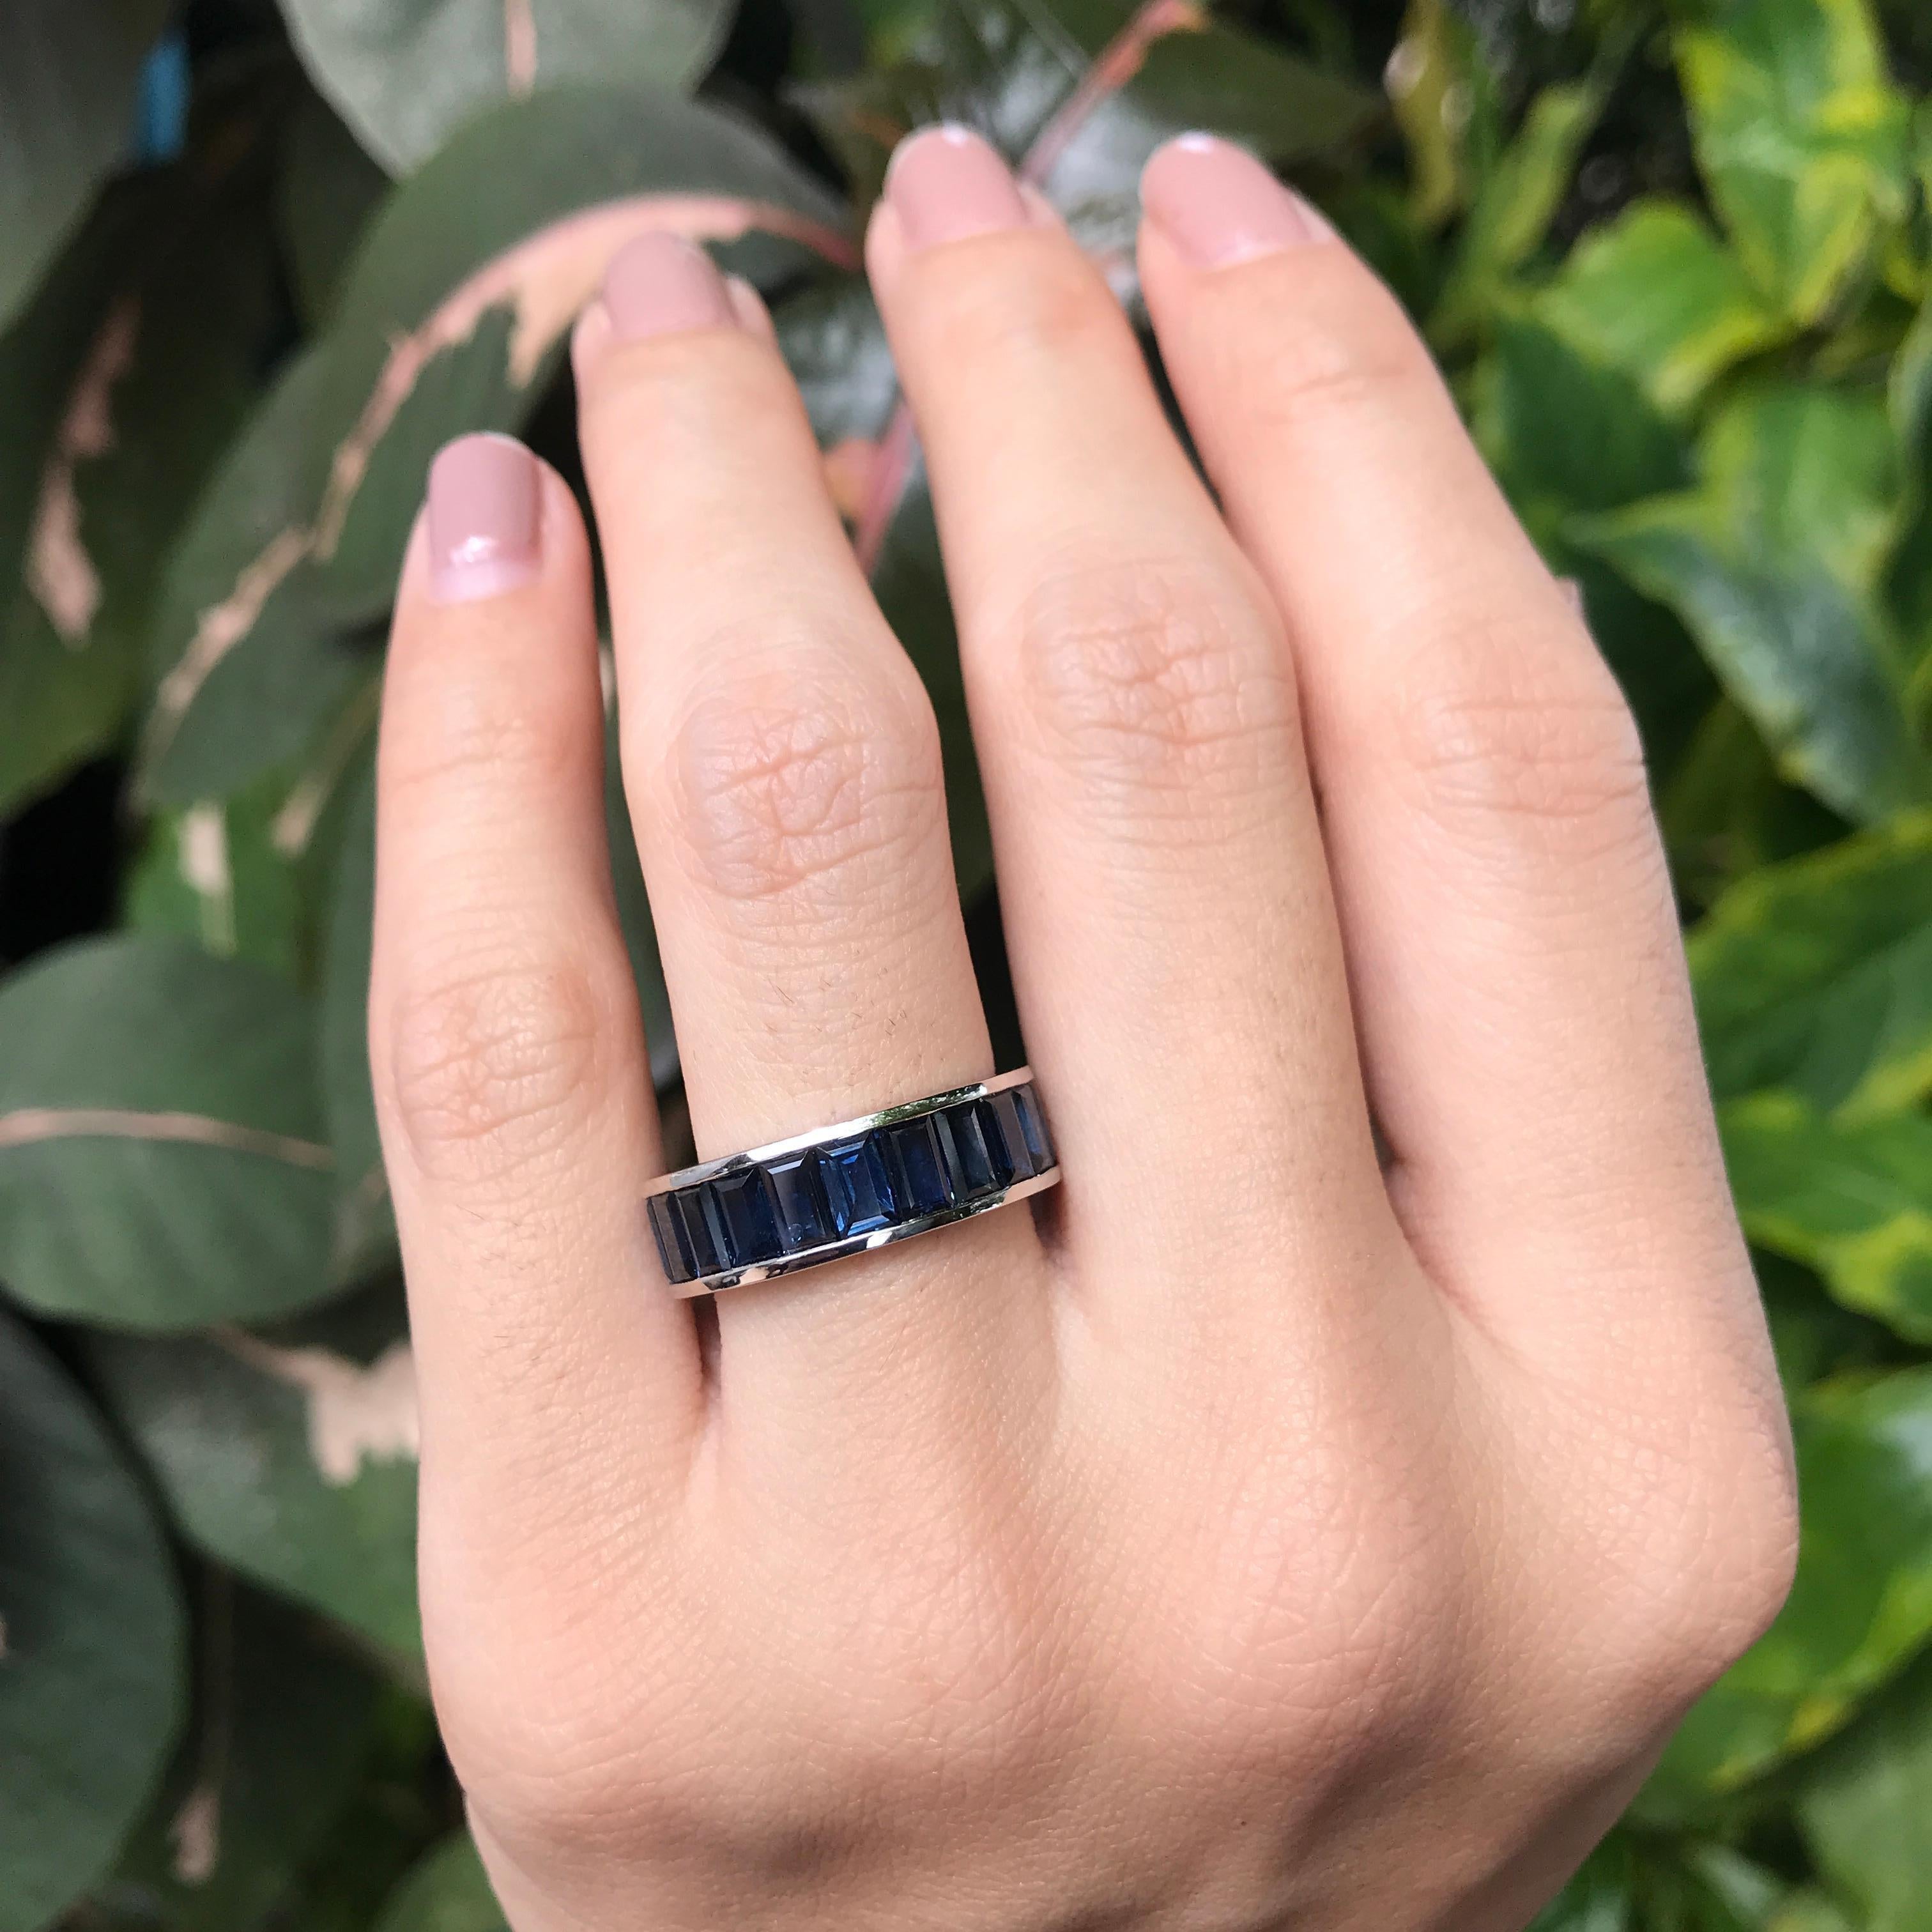 A unisex ring that can truly amp up the style of any outfit!

This sapphire eternity band is the perfect addition to your collection. Twenty-two baguette-cut sapphires are vertically set in 18K white gold. The ring measures 6 mm. width so it looks